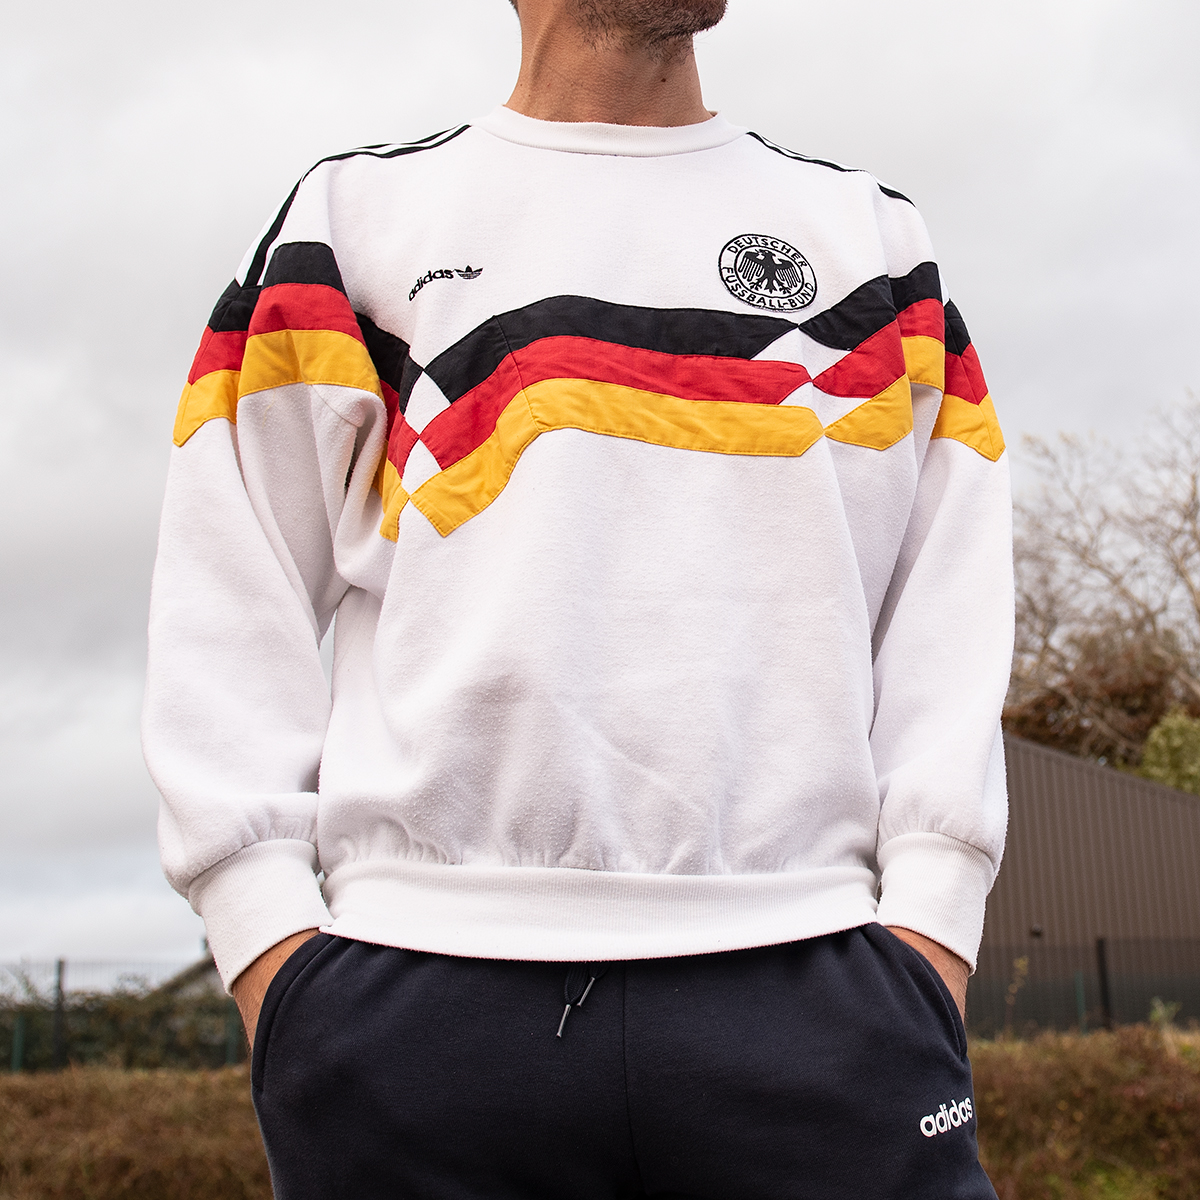 Classic Shirts Twitterren: "Germany 1990 Sweat Top by Adidas One of the greatest shirt designs, but on a jumper. Not sure gets any better. https://t.co/KE23FTeqtl" / Twitter